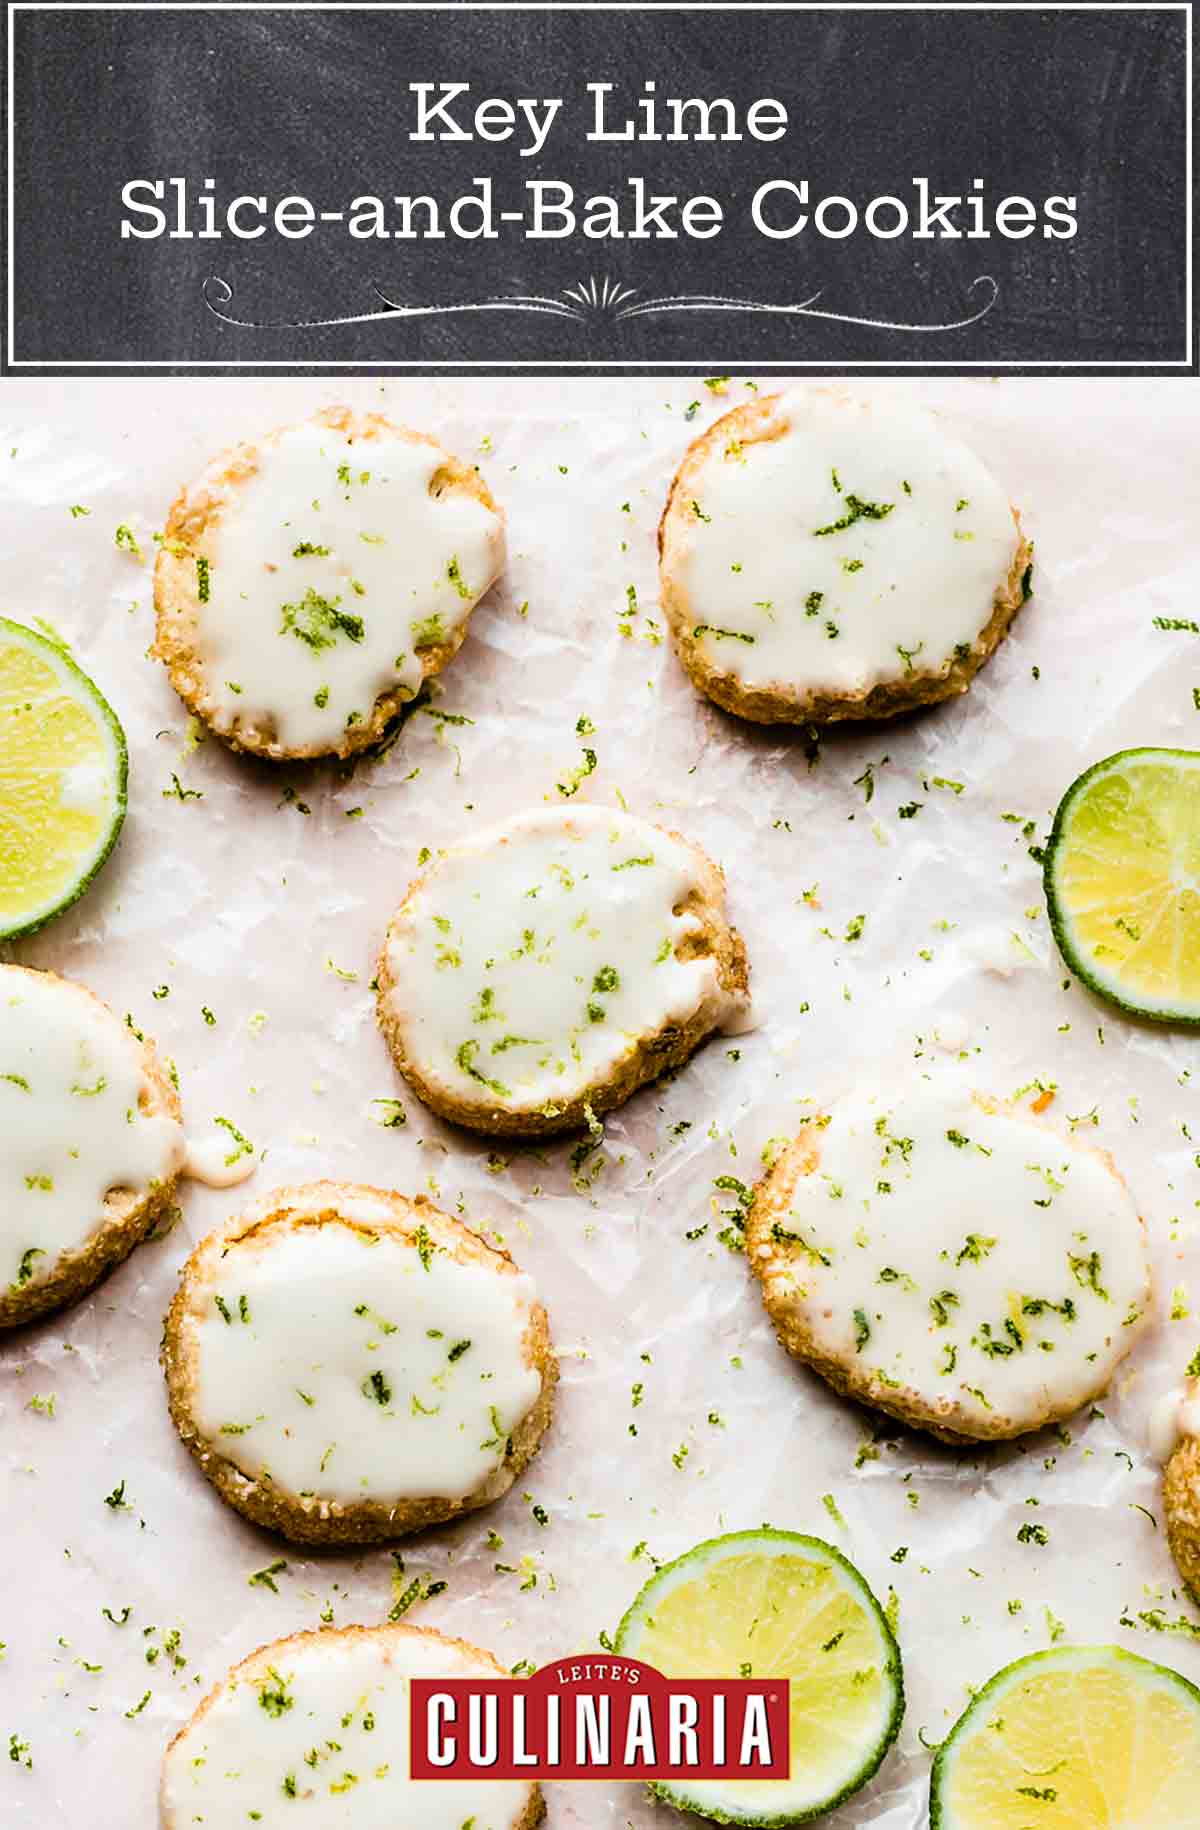 Key lime slice and bake cookies garnished with lime zest beside slices of lime, all on a sheet of parchment paper.